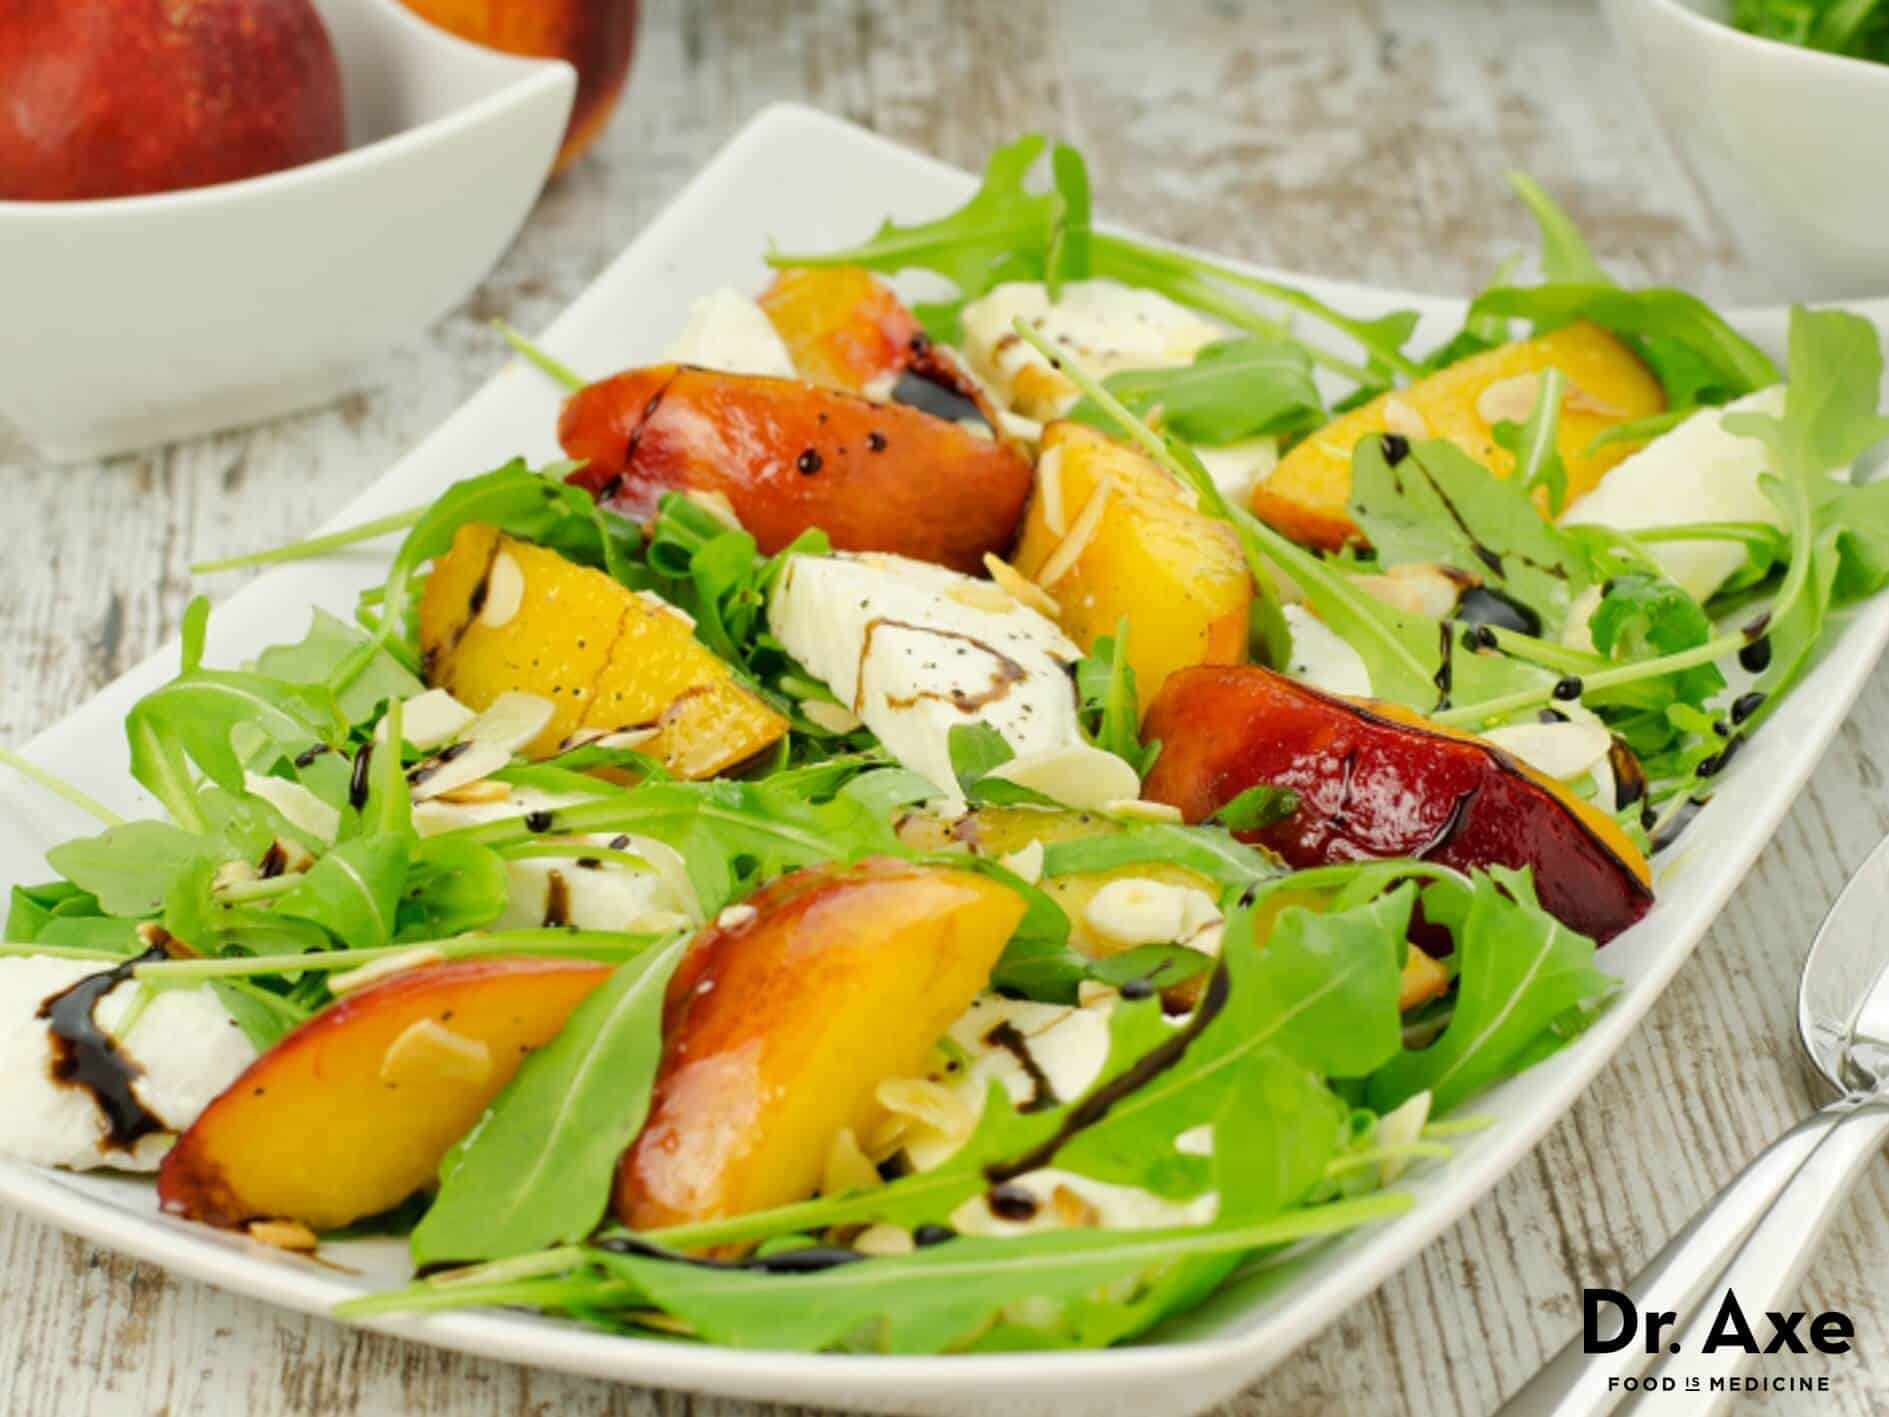 Peach salad recipe with goat cheese - Dr. Axe